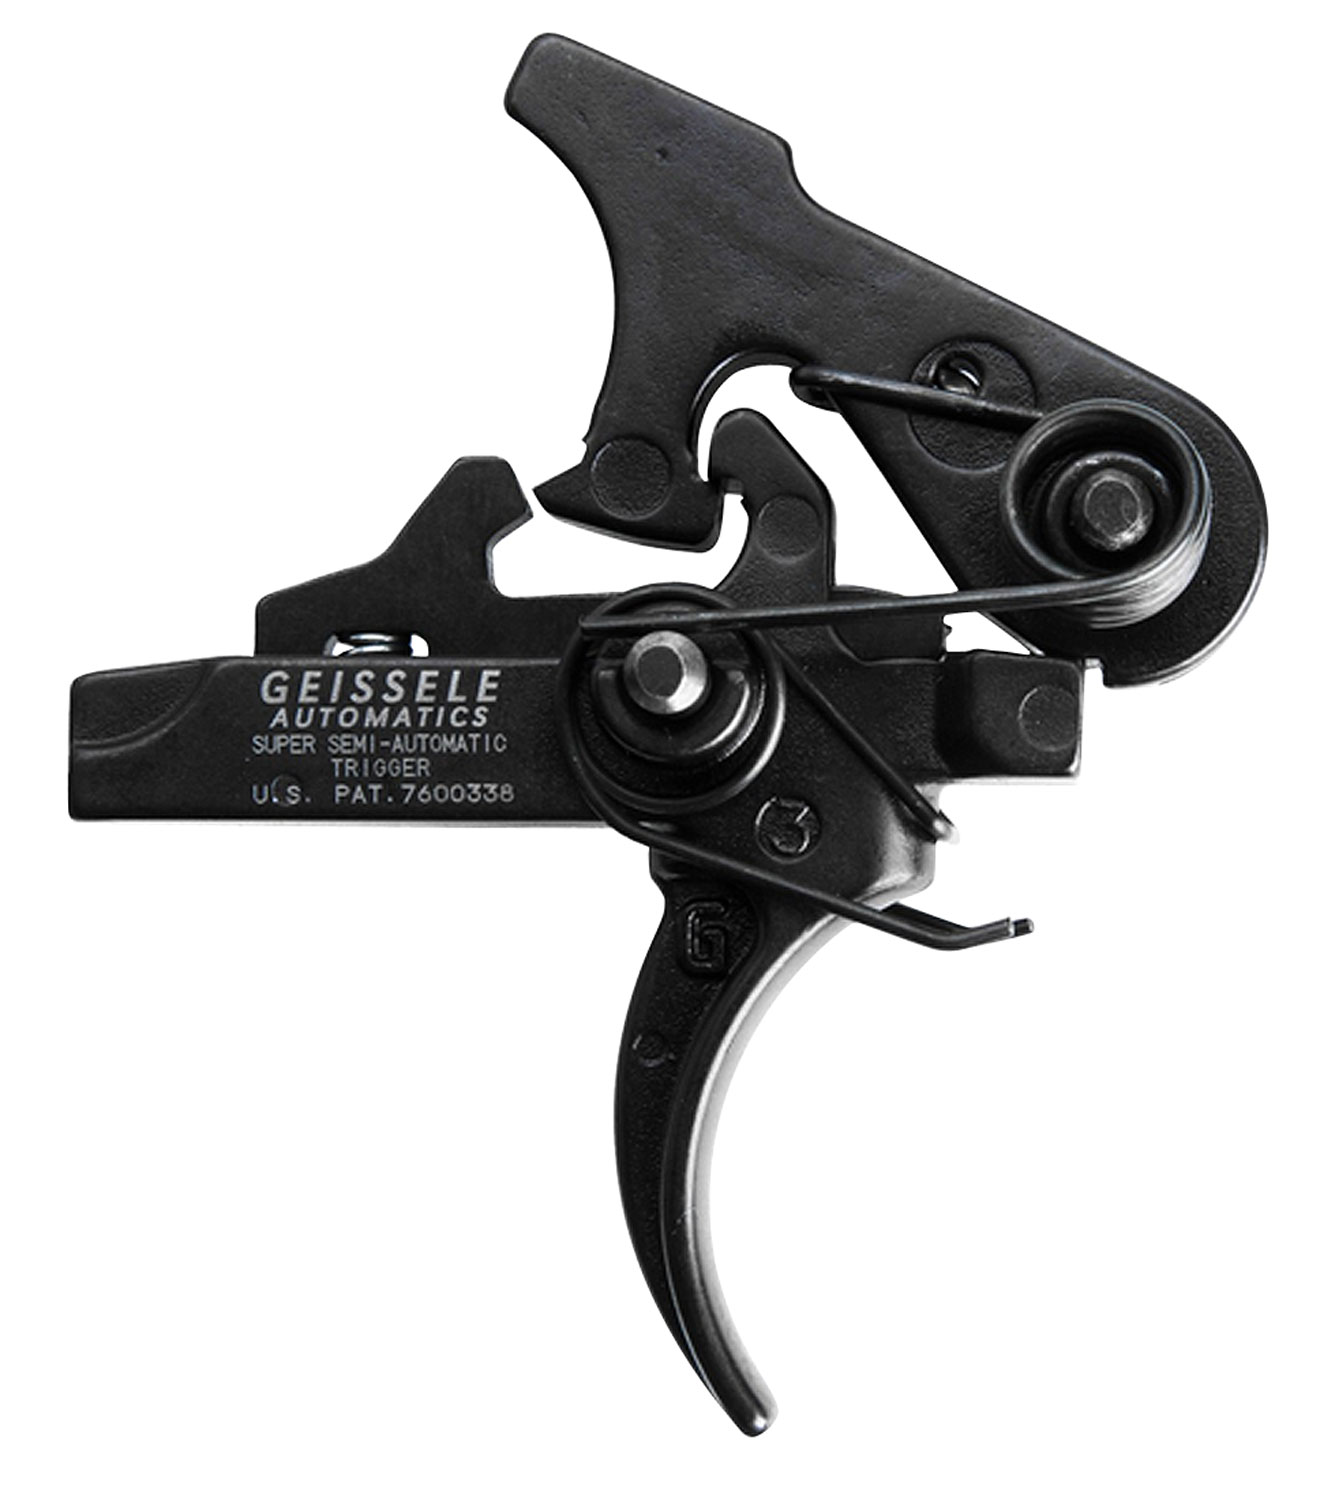 Geissele Automatics 05101 SSA  Two-Stage Curved Trigger with 4.25-4.75 lbs Draw Weight & Black Oxide Finish for AR-Platform